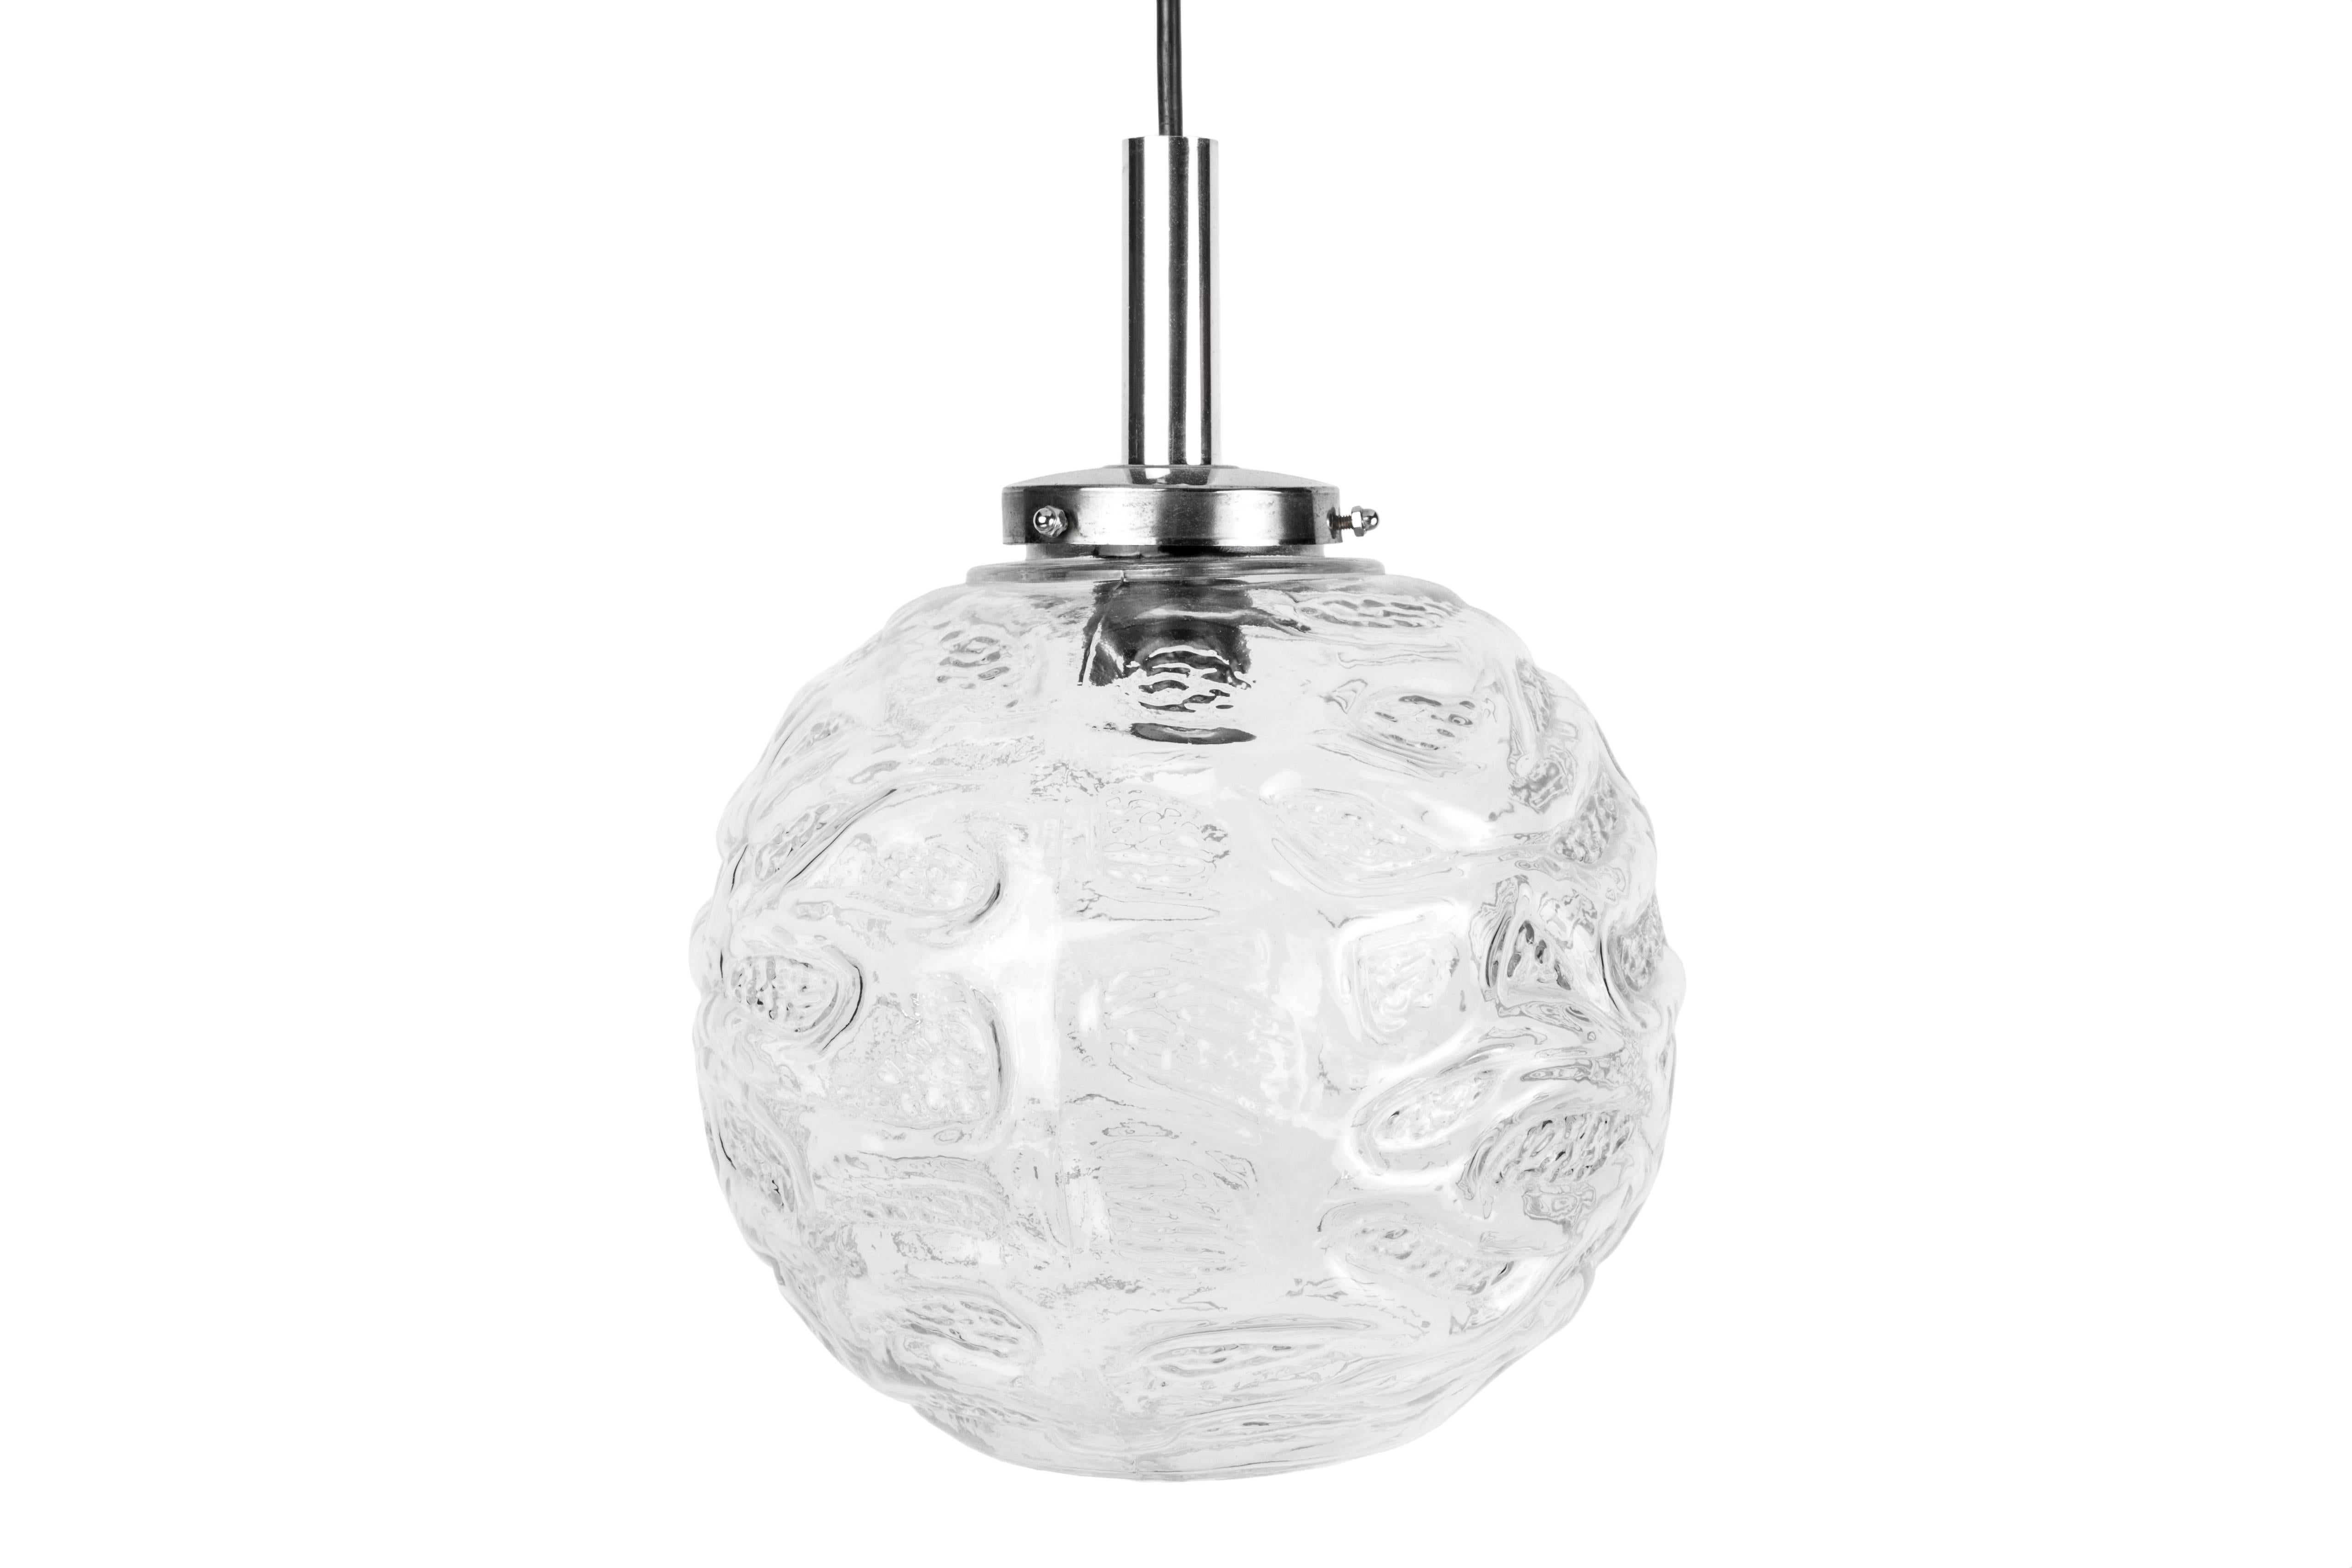 This impressive pair of Mid-Century Modernist pendants were designed by Doria. They feature a chrome base connected to glass circular globes with etched detailing.